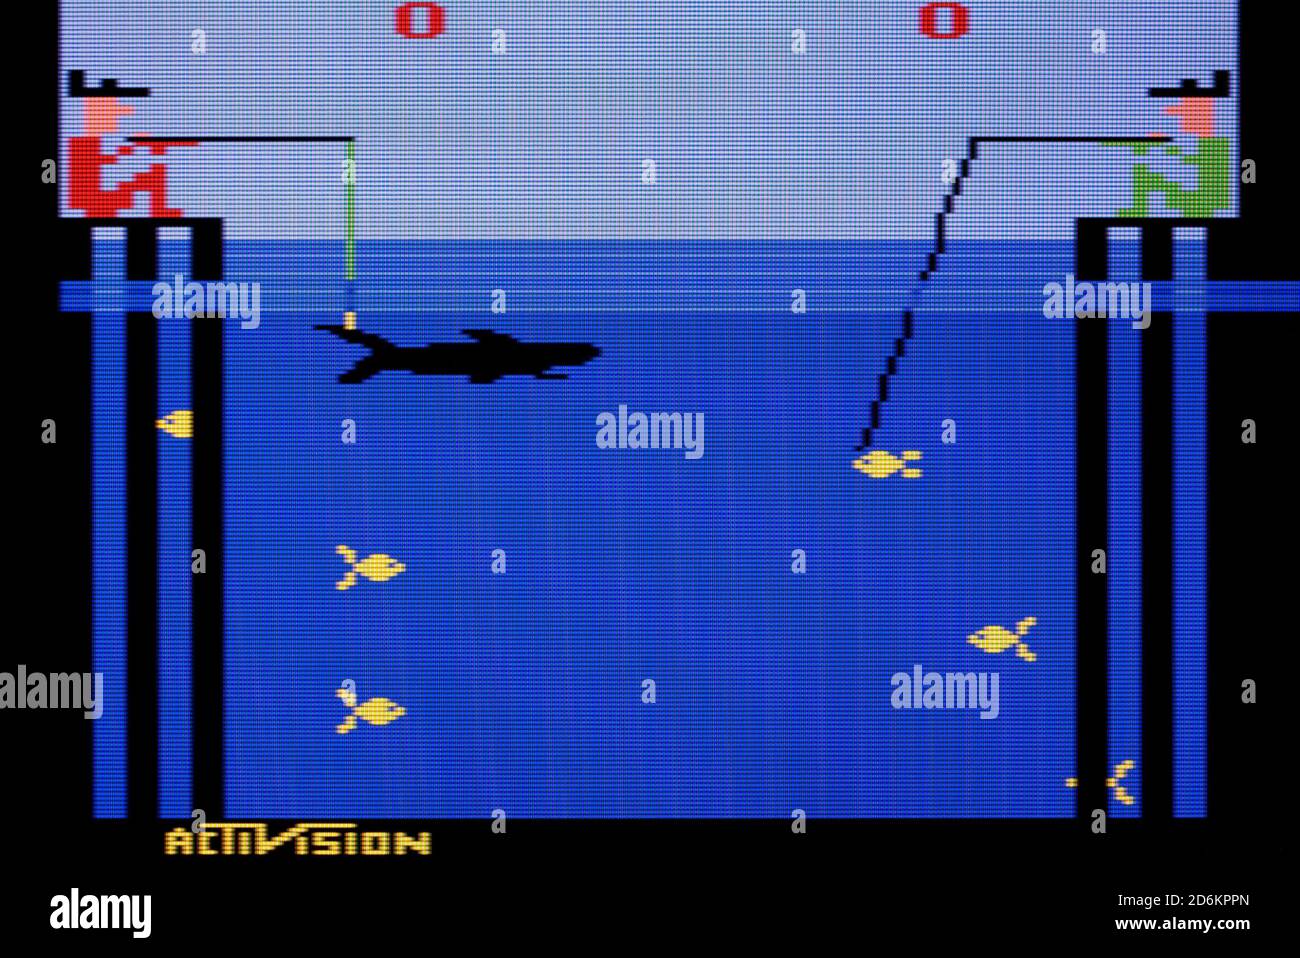 Fishing Derby - Activision - Atari 2600 VCS Videogame - Editorial use only  Stock Photo - Alamy